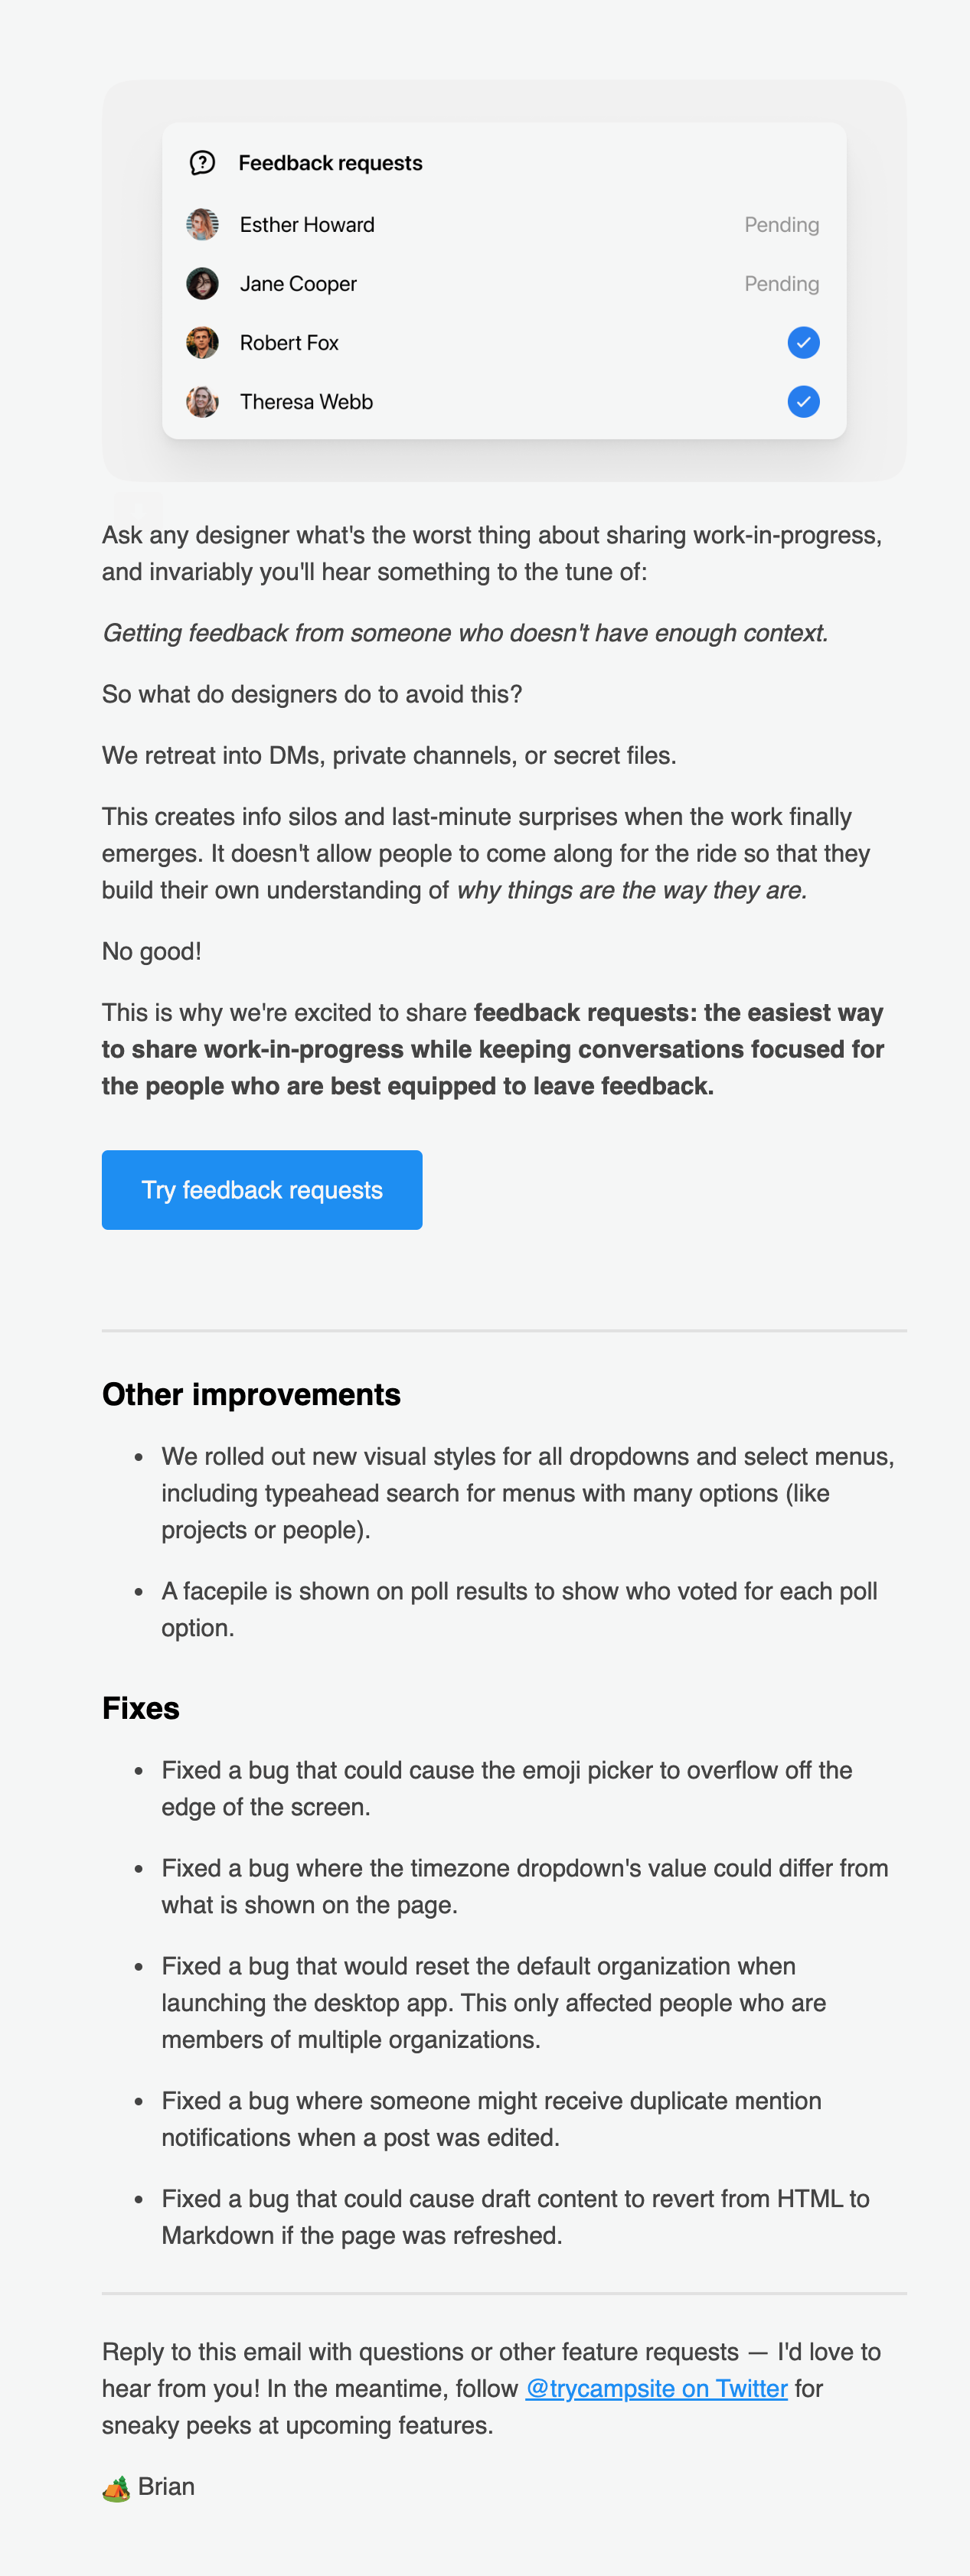 Storytelling in SaaS Emails: Screenshot of Campsite's email talking about their feedback requests feature